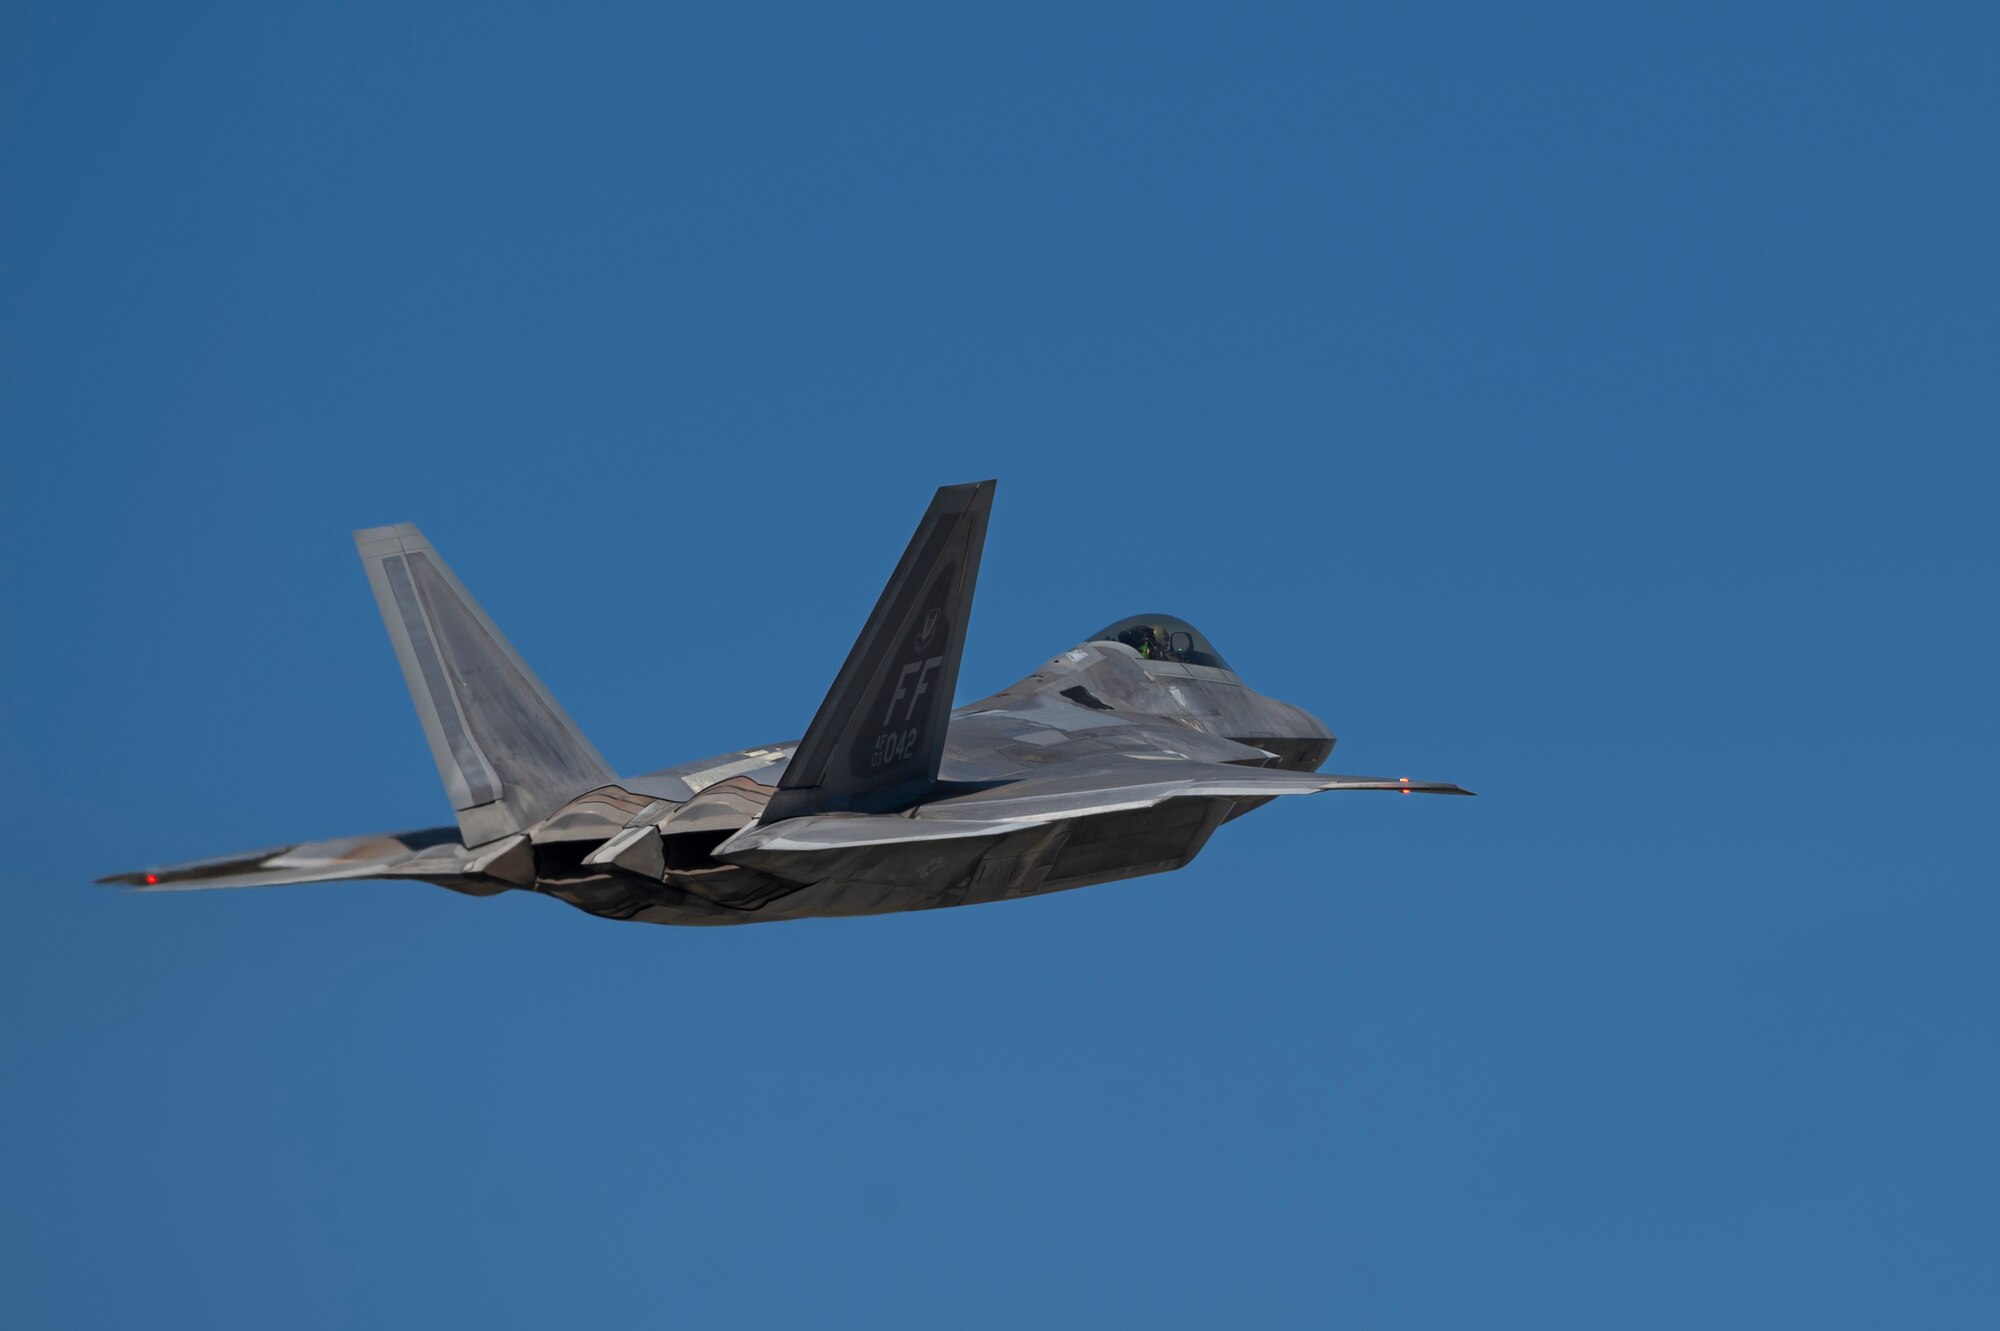 F-22 Raptor assigned to the 71st Fighter Squadron